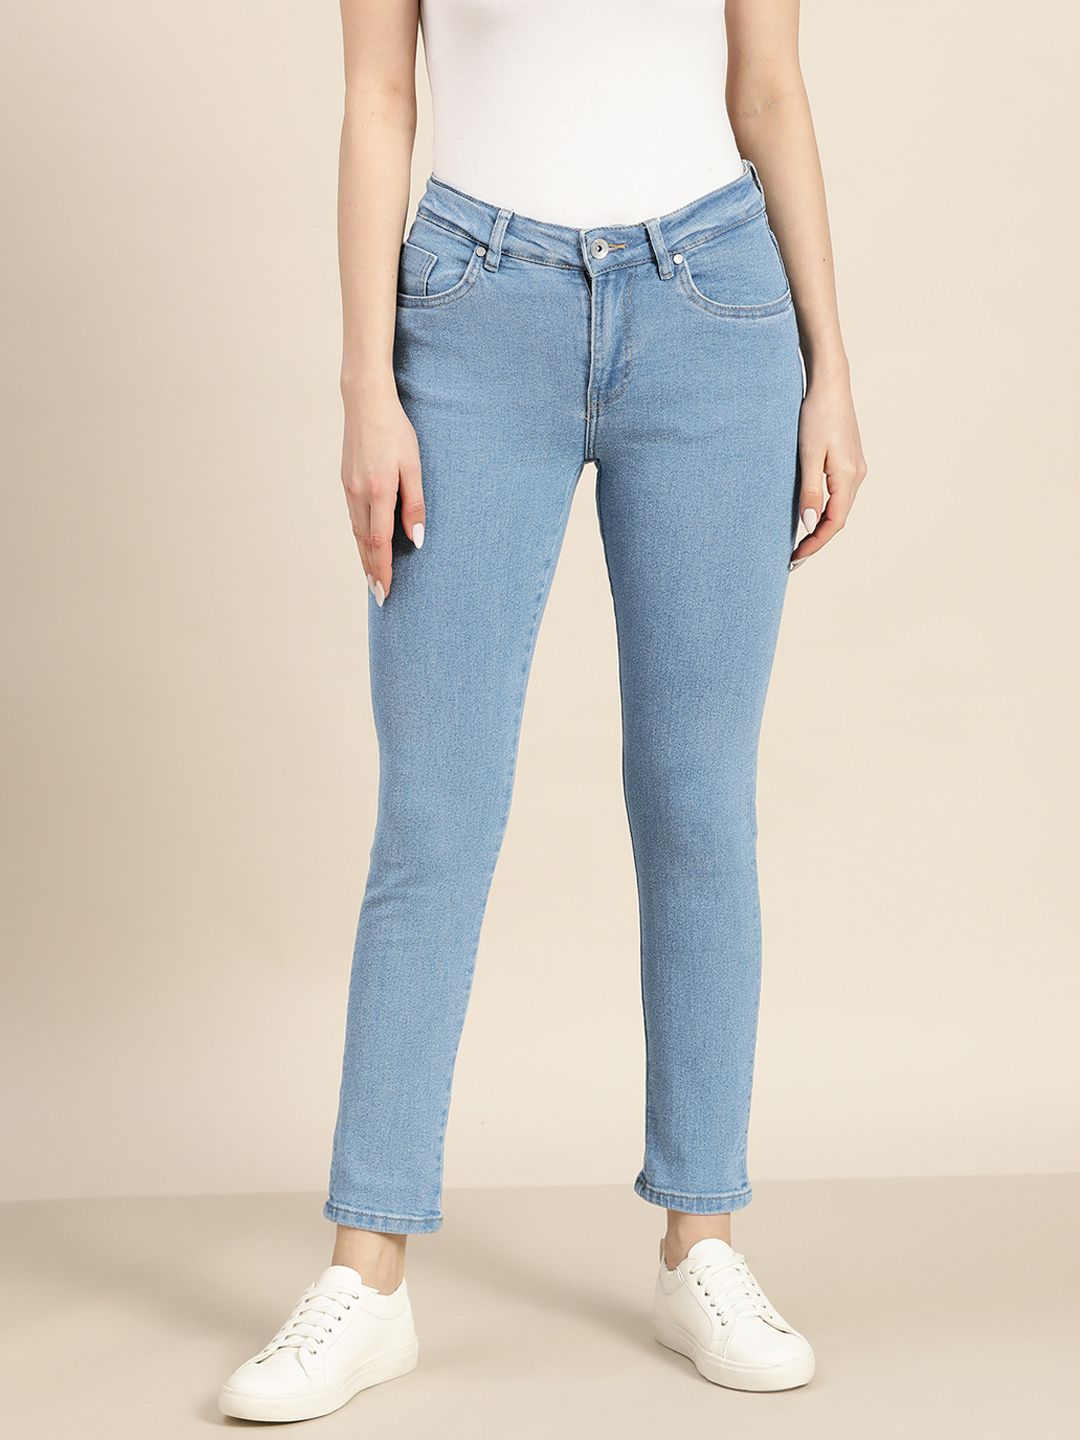 ether Women Blue Slim Fit Stretchable Jeans Price in India